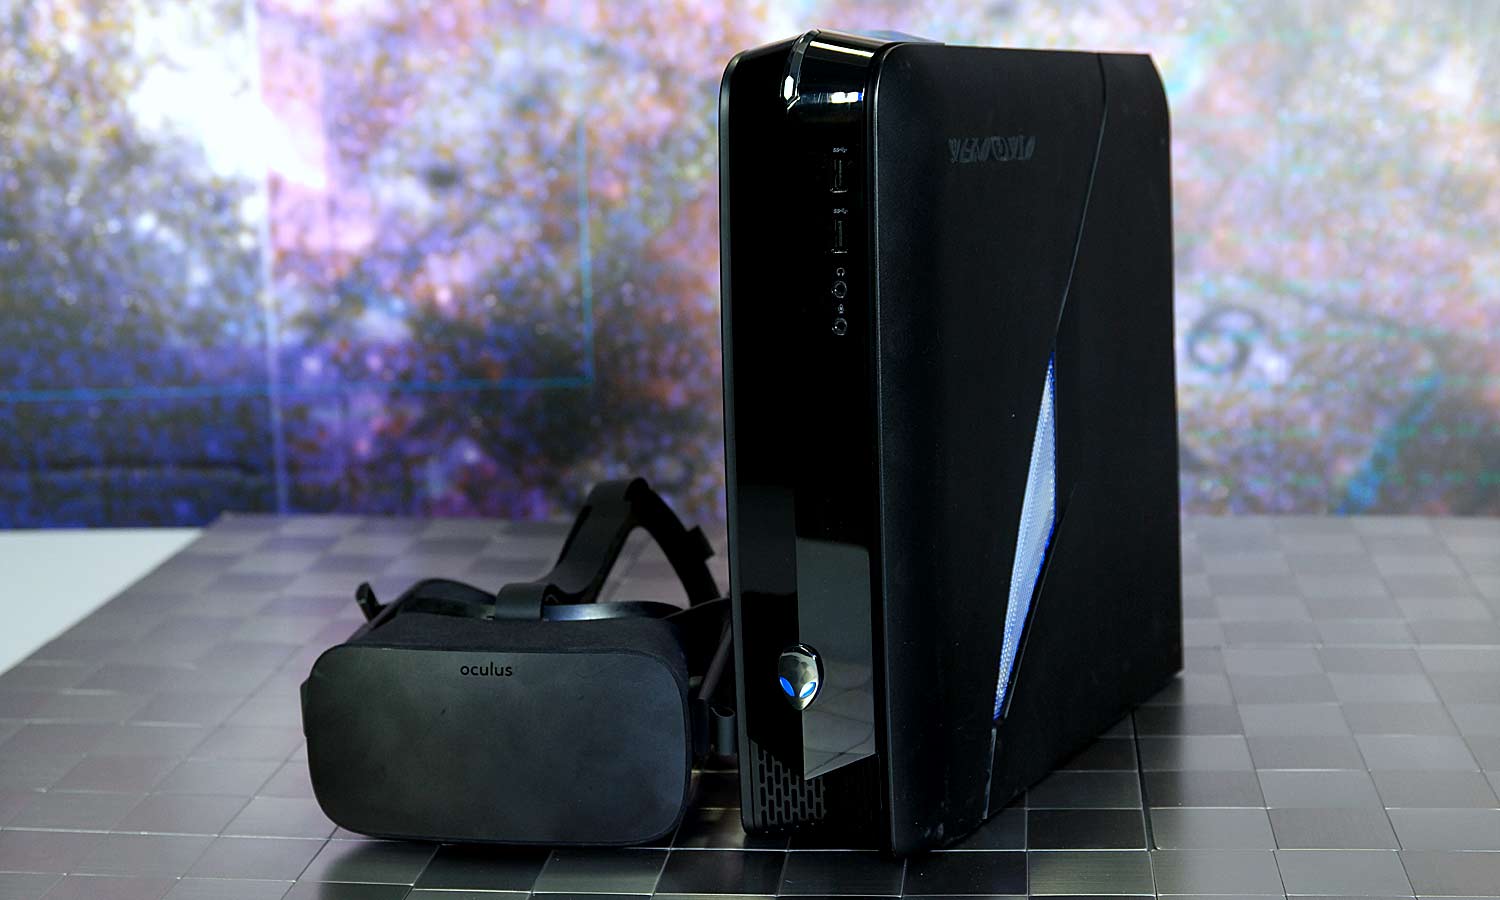 Alienware X51 R3 (2016) Review: VR-Ready and Affordable | Tom's Guide